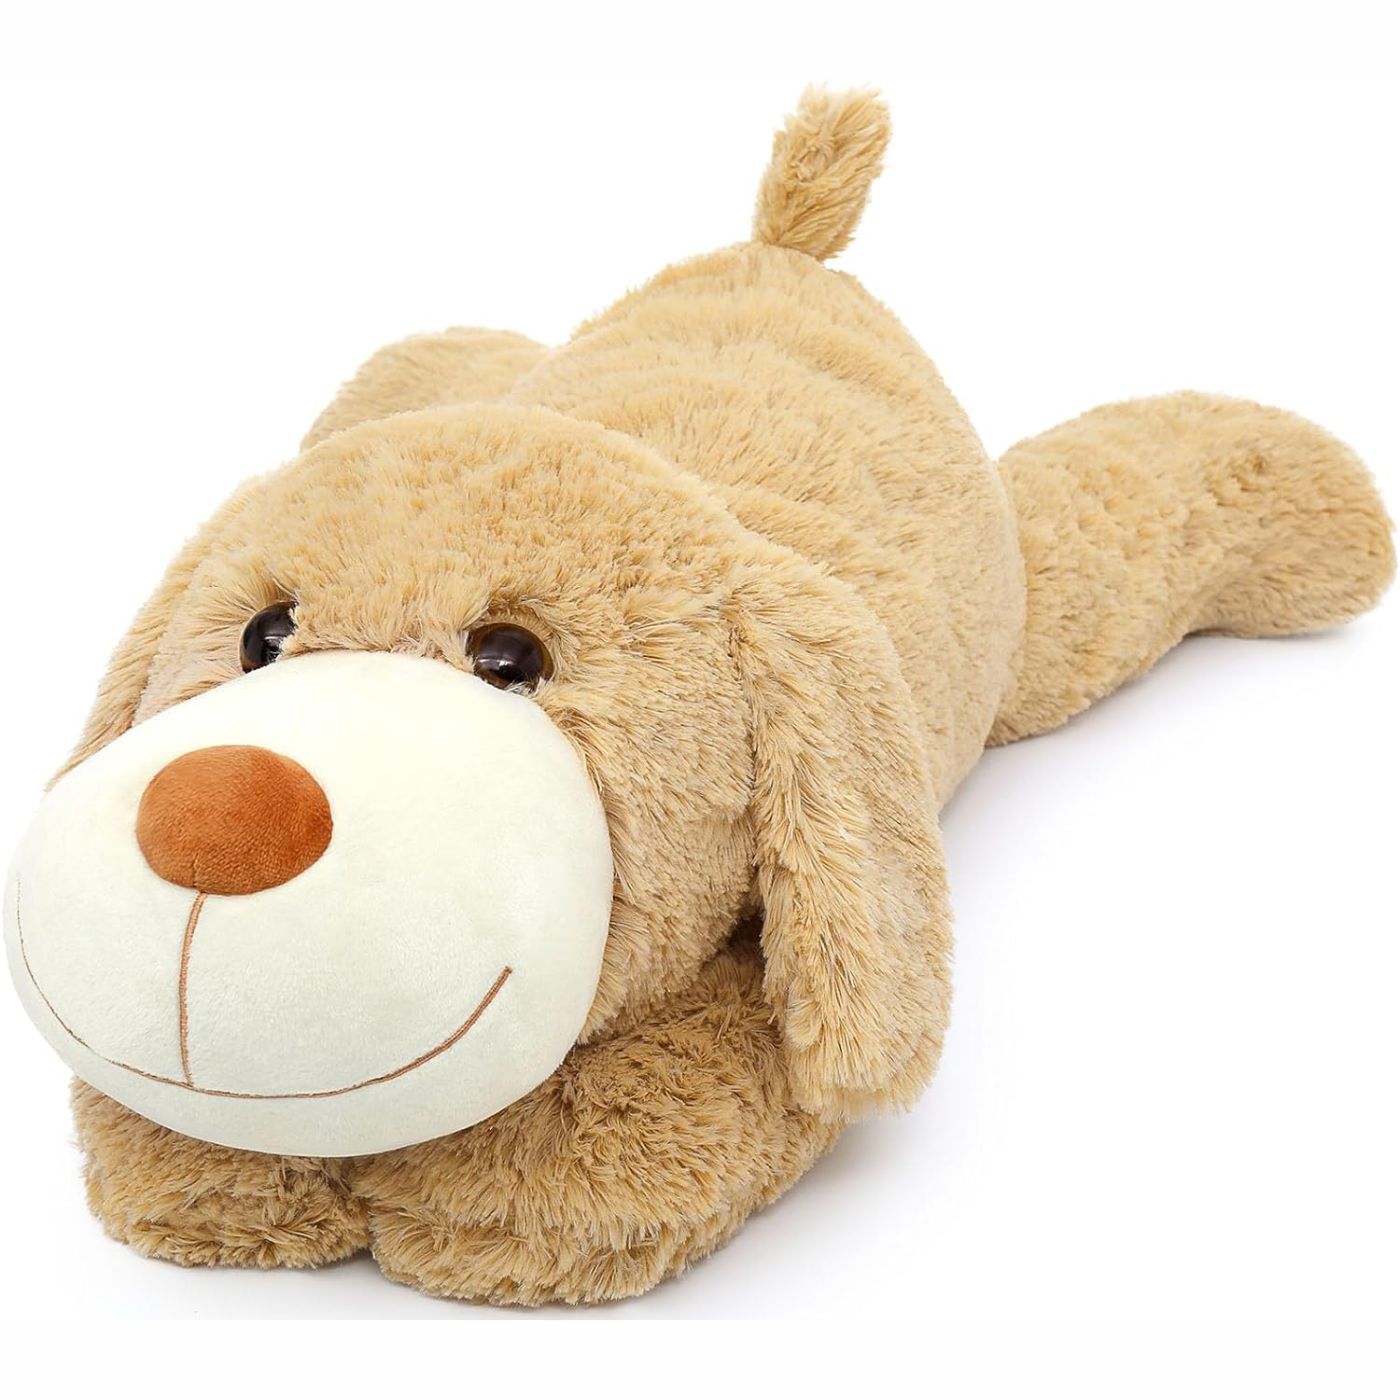 Weighted Dog Stuffed Toy, 5.5 lbs, 31 Inches